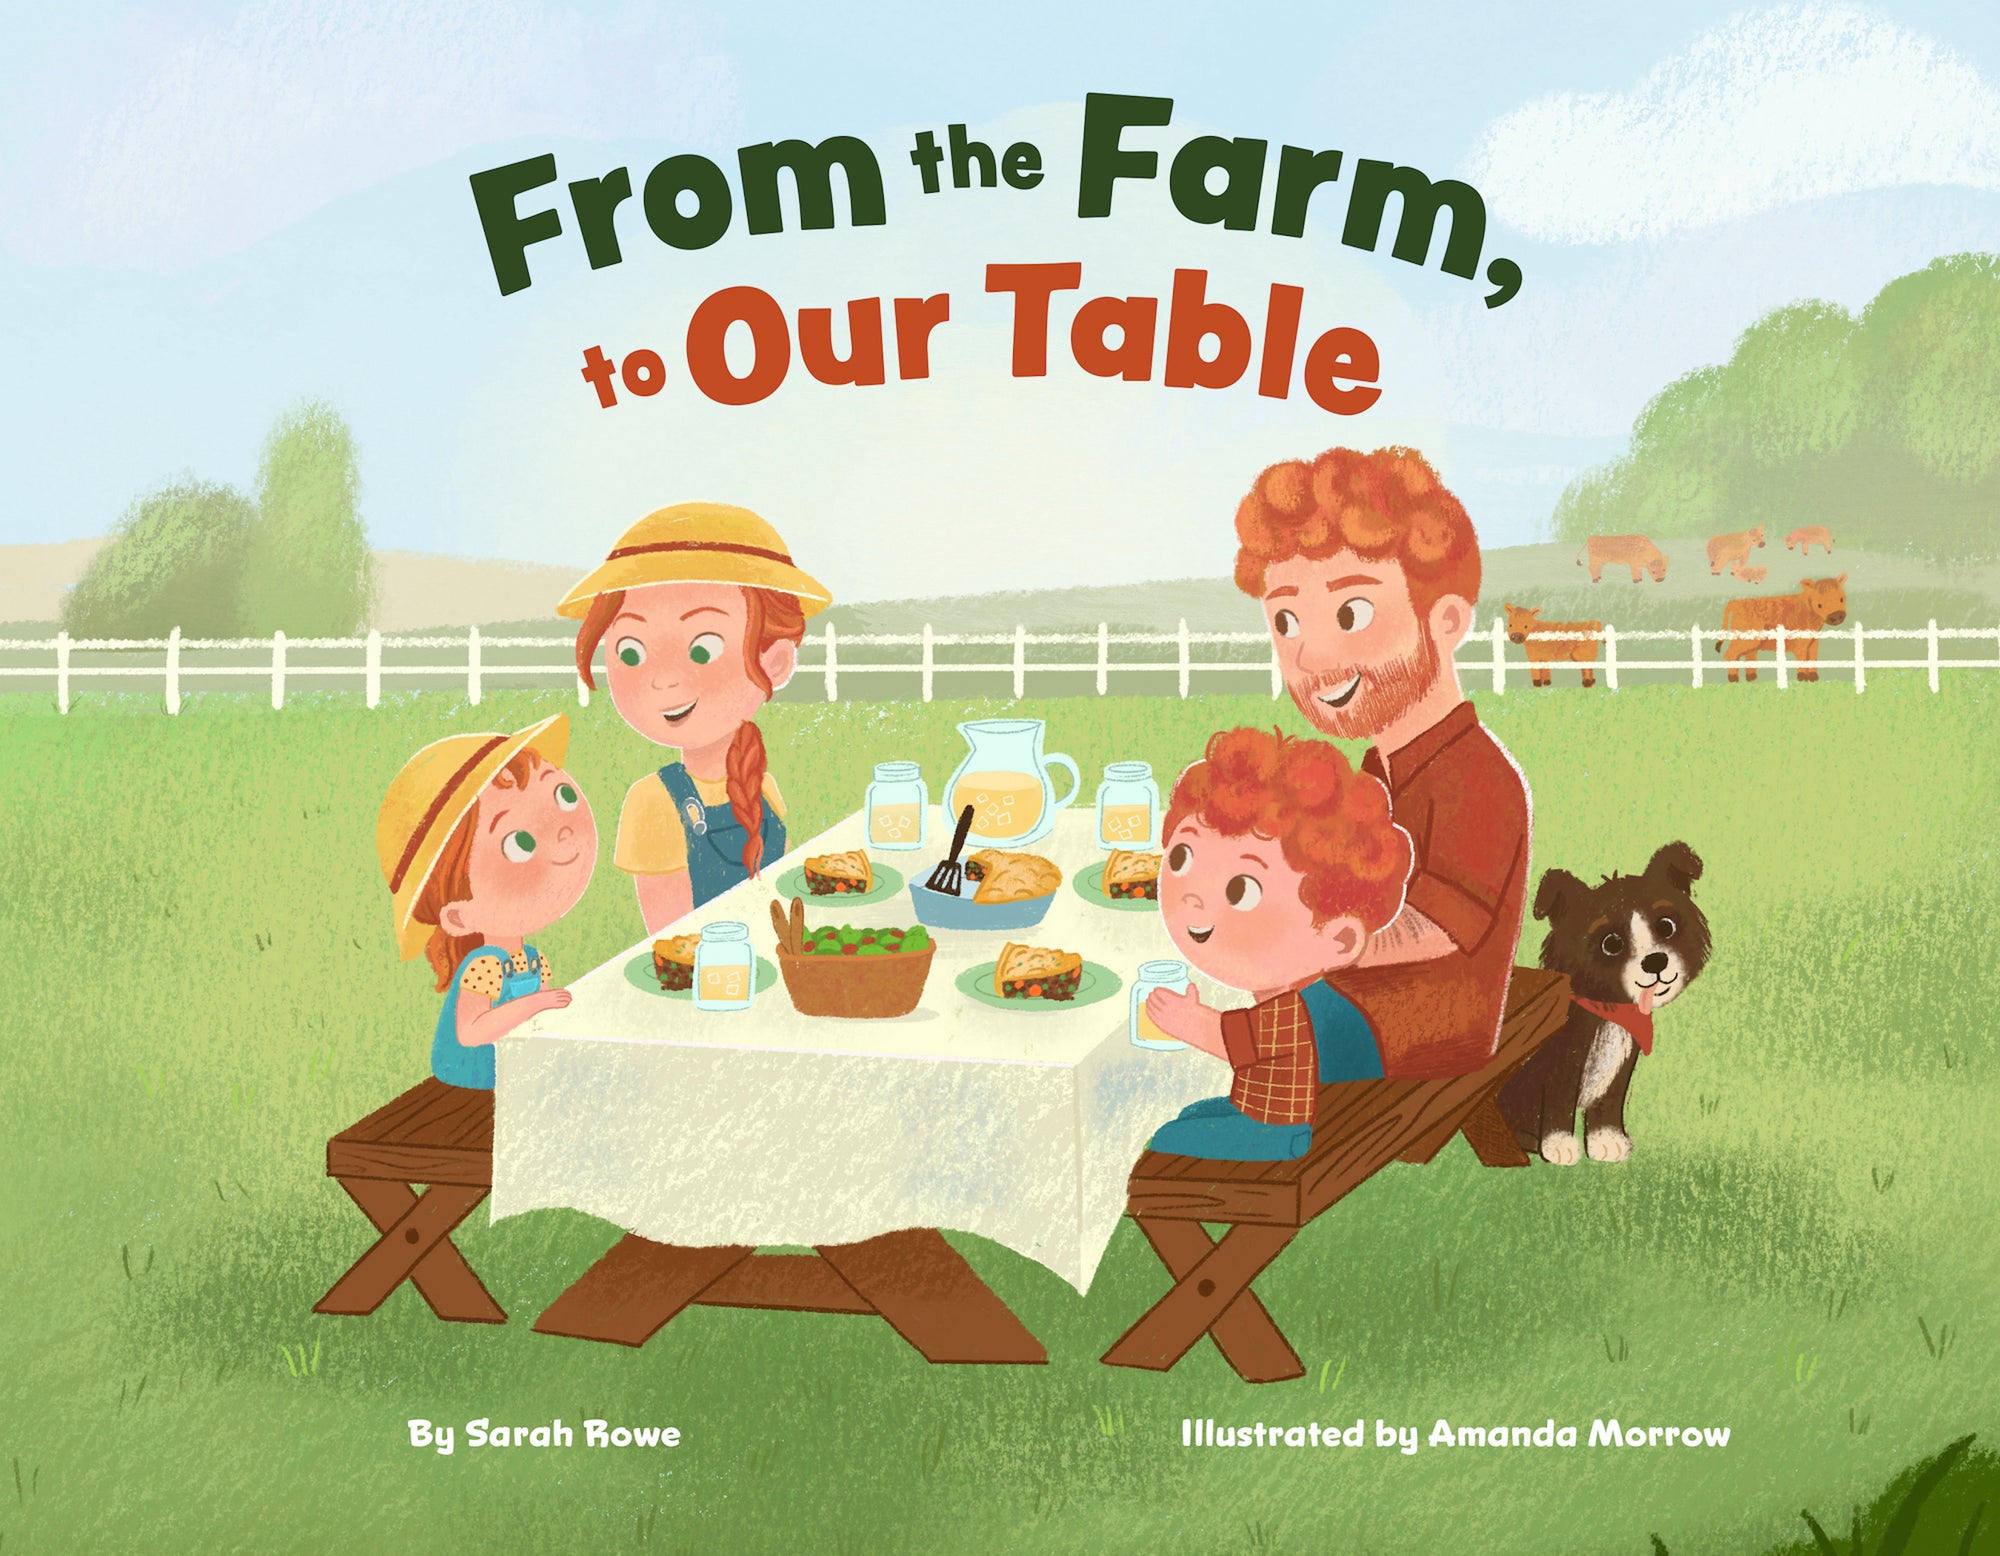 From the Farm, to Our Table